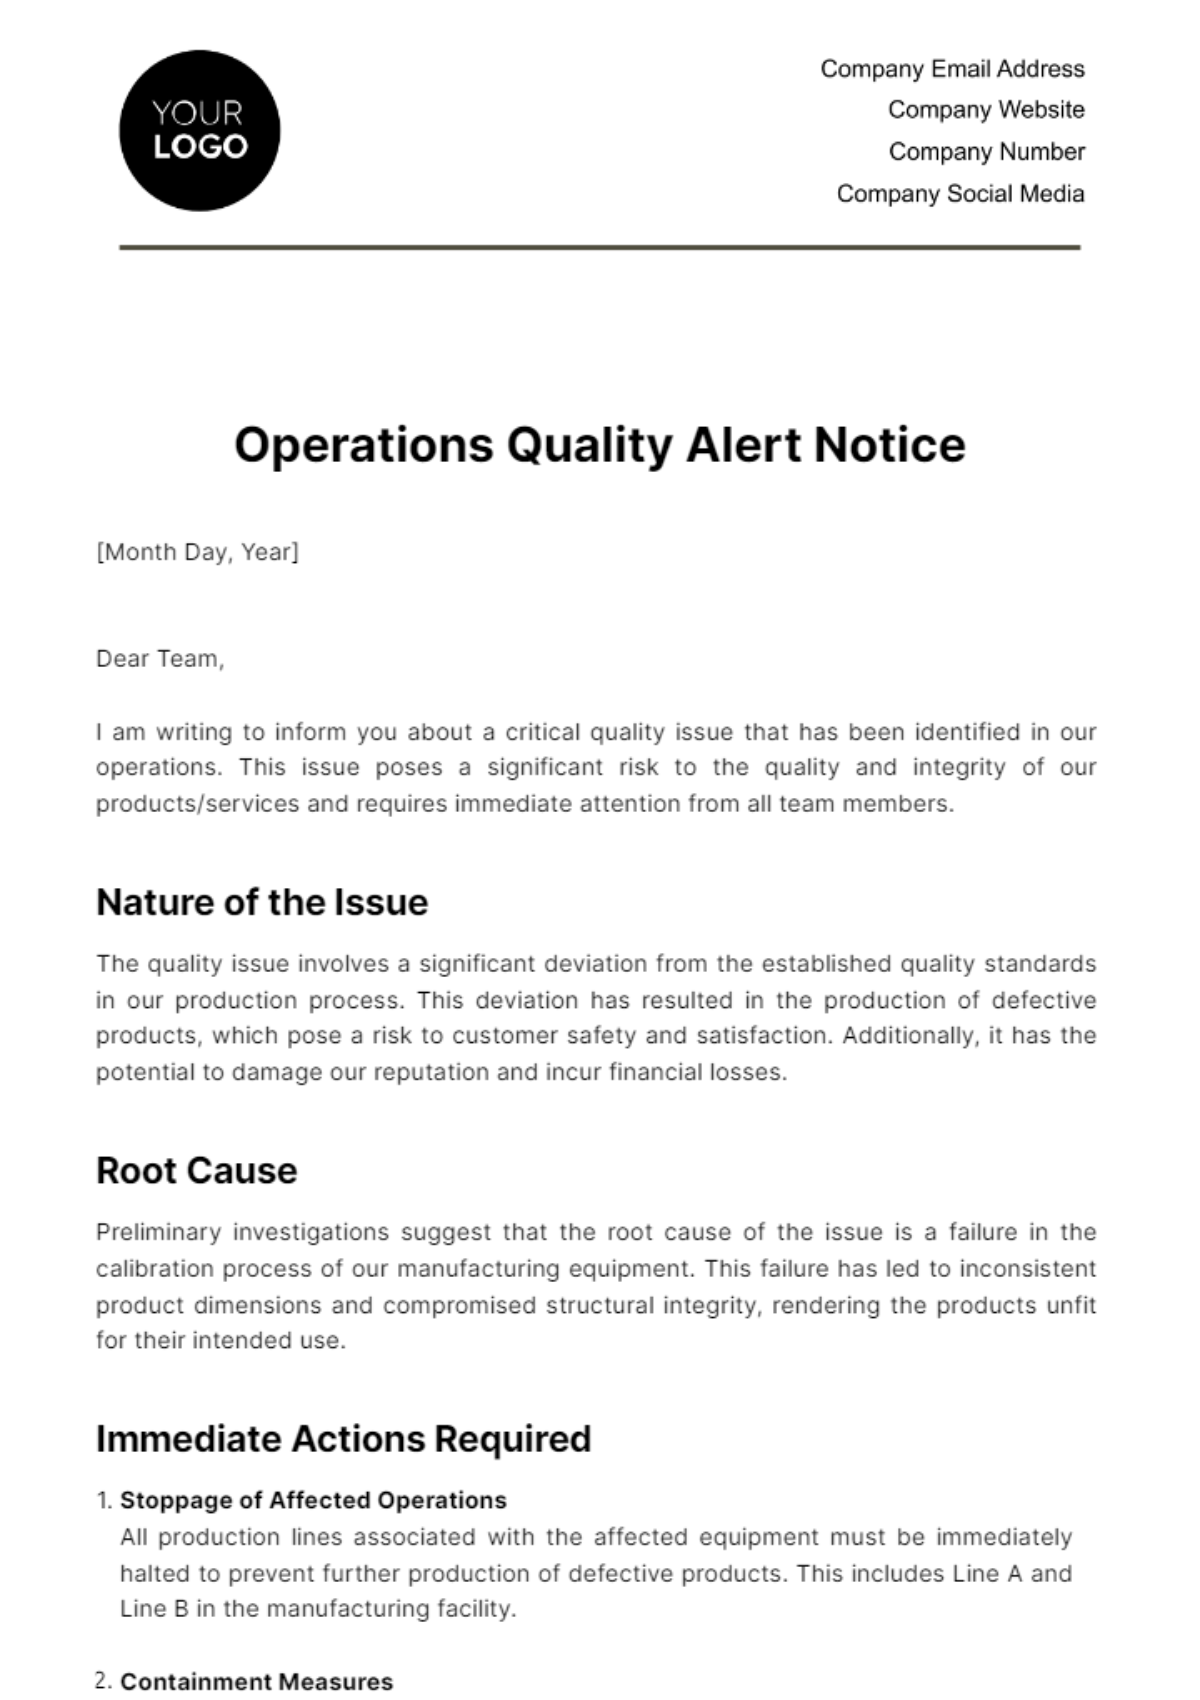 Free Operations Quality Alert Notice Template